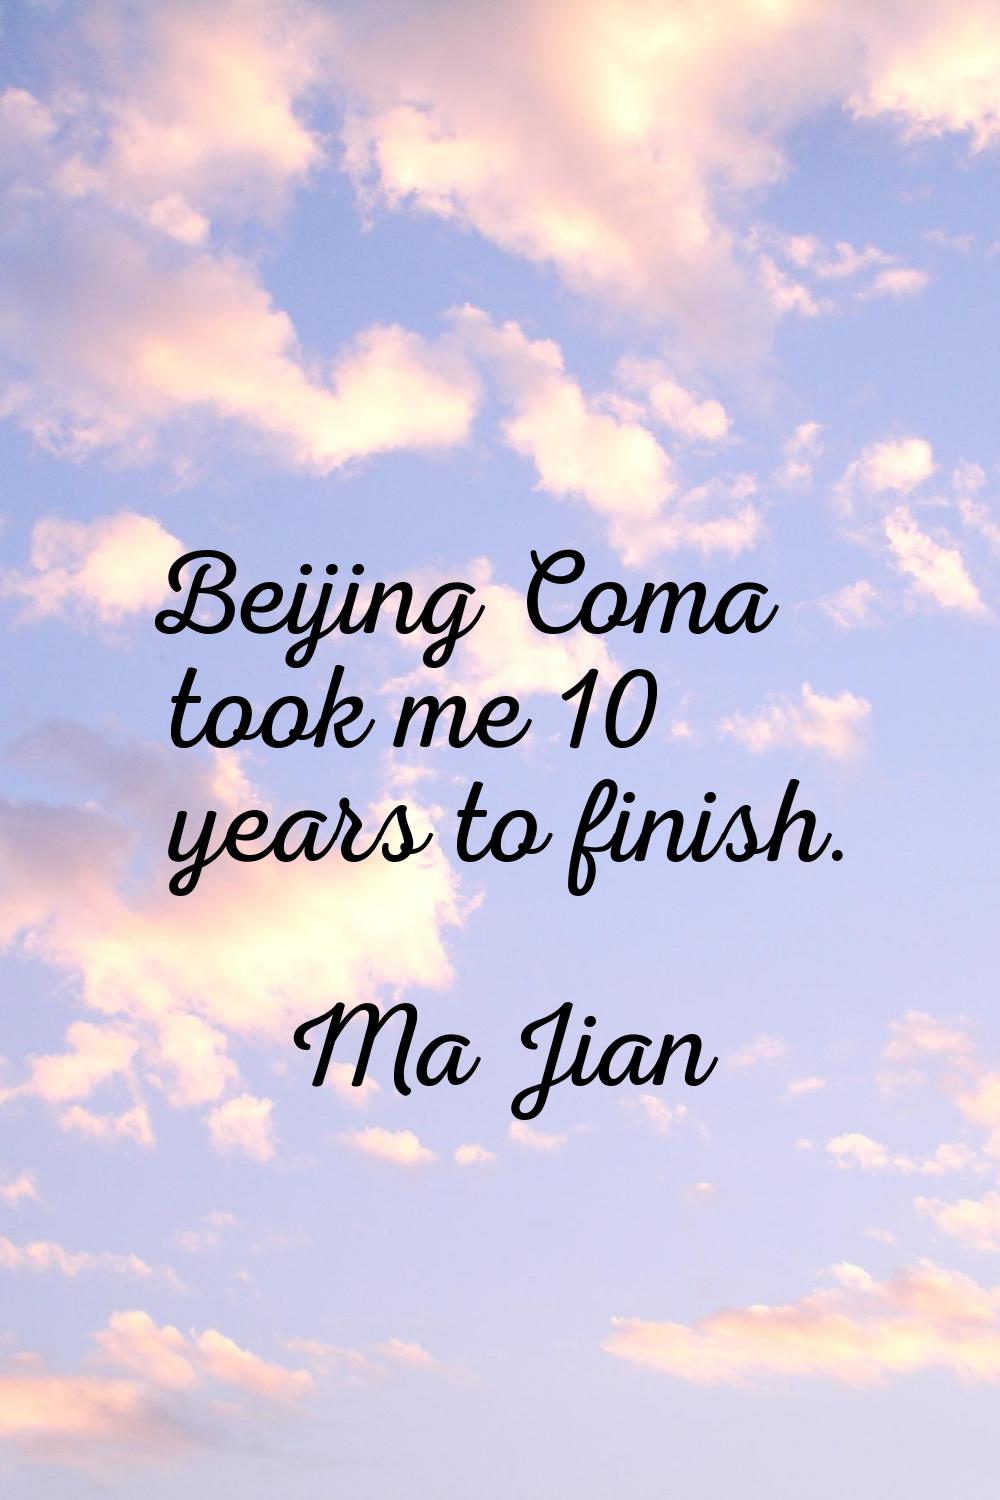 Beijing Coma took me 10 years to finish.